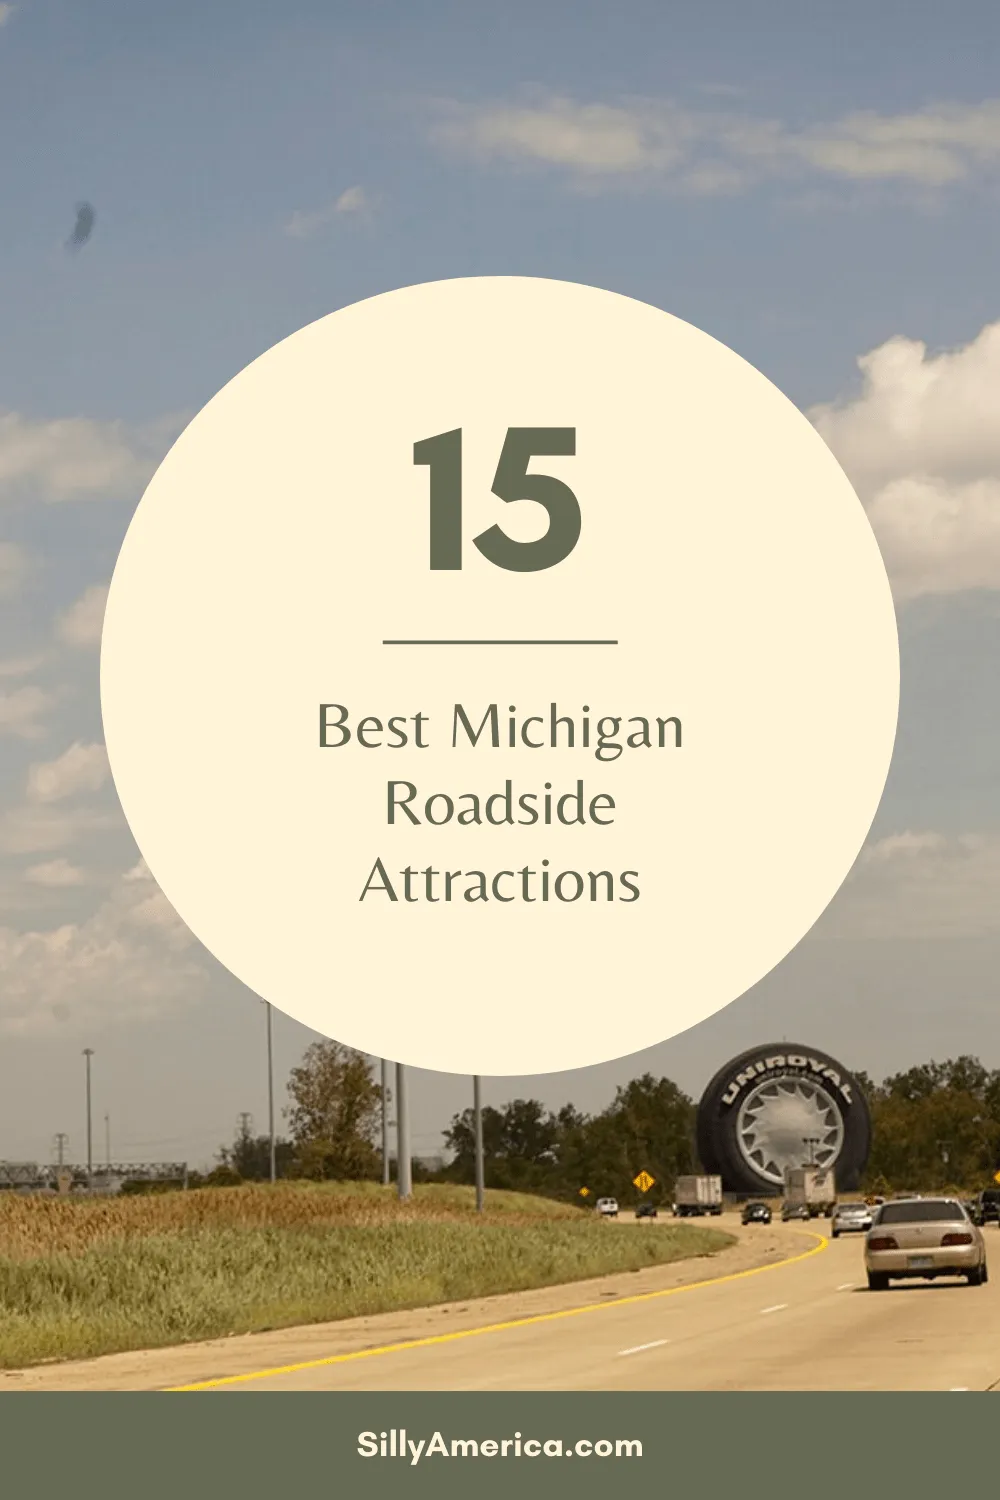 The best Michigan roadside attractions to visit on a Michigan road trip or weekend getaway. Add these roadside oddities to your travel bucket list or road trip itinerary! #MichiganRoadsideAttractions #MichiganRoadsideAttraction #RoadsideAttractions #RoadsideAttraction #RoadTrip #MichiganRoadTrip #MichiganWeekendGetaways #MichiganSummerRoadTrip #UpperPeninsulaRoadTrip #MichiganRoadTripPlacesToVisit#MichiganRoadTripIdeas #MichiganRoadTripDestinations #MichiganRoadTripMap